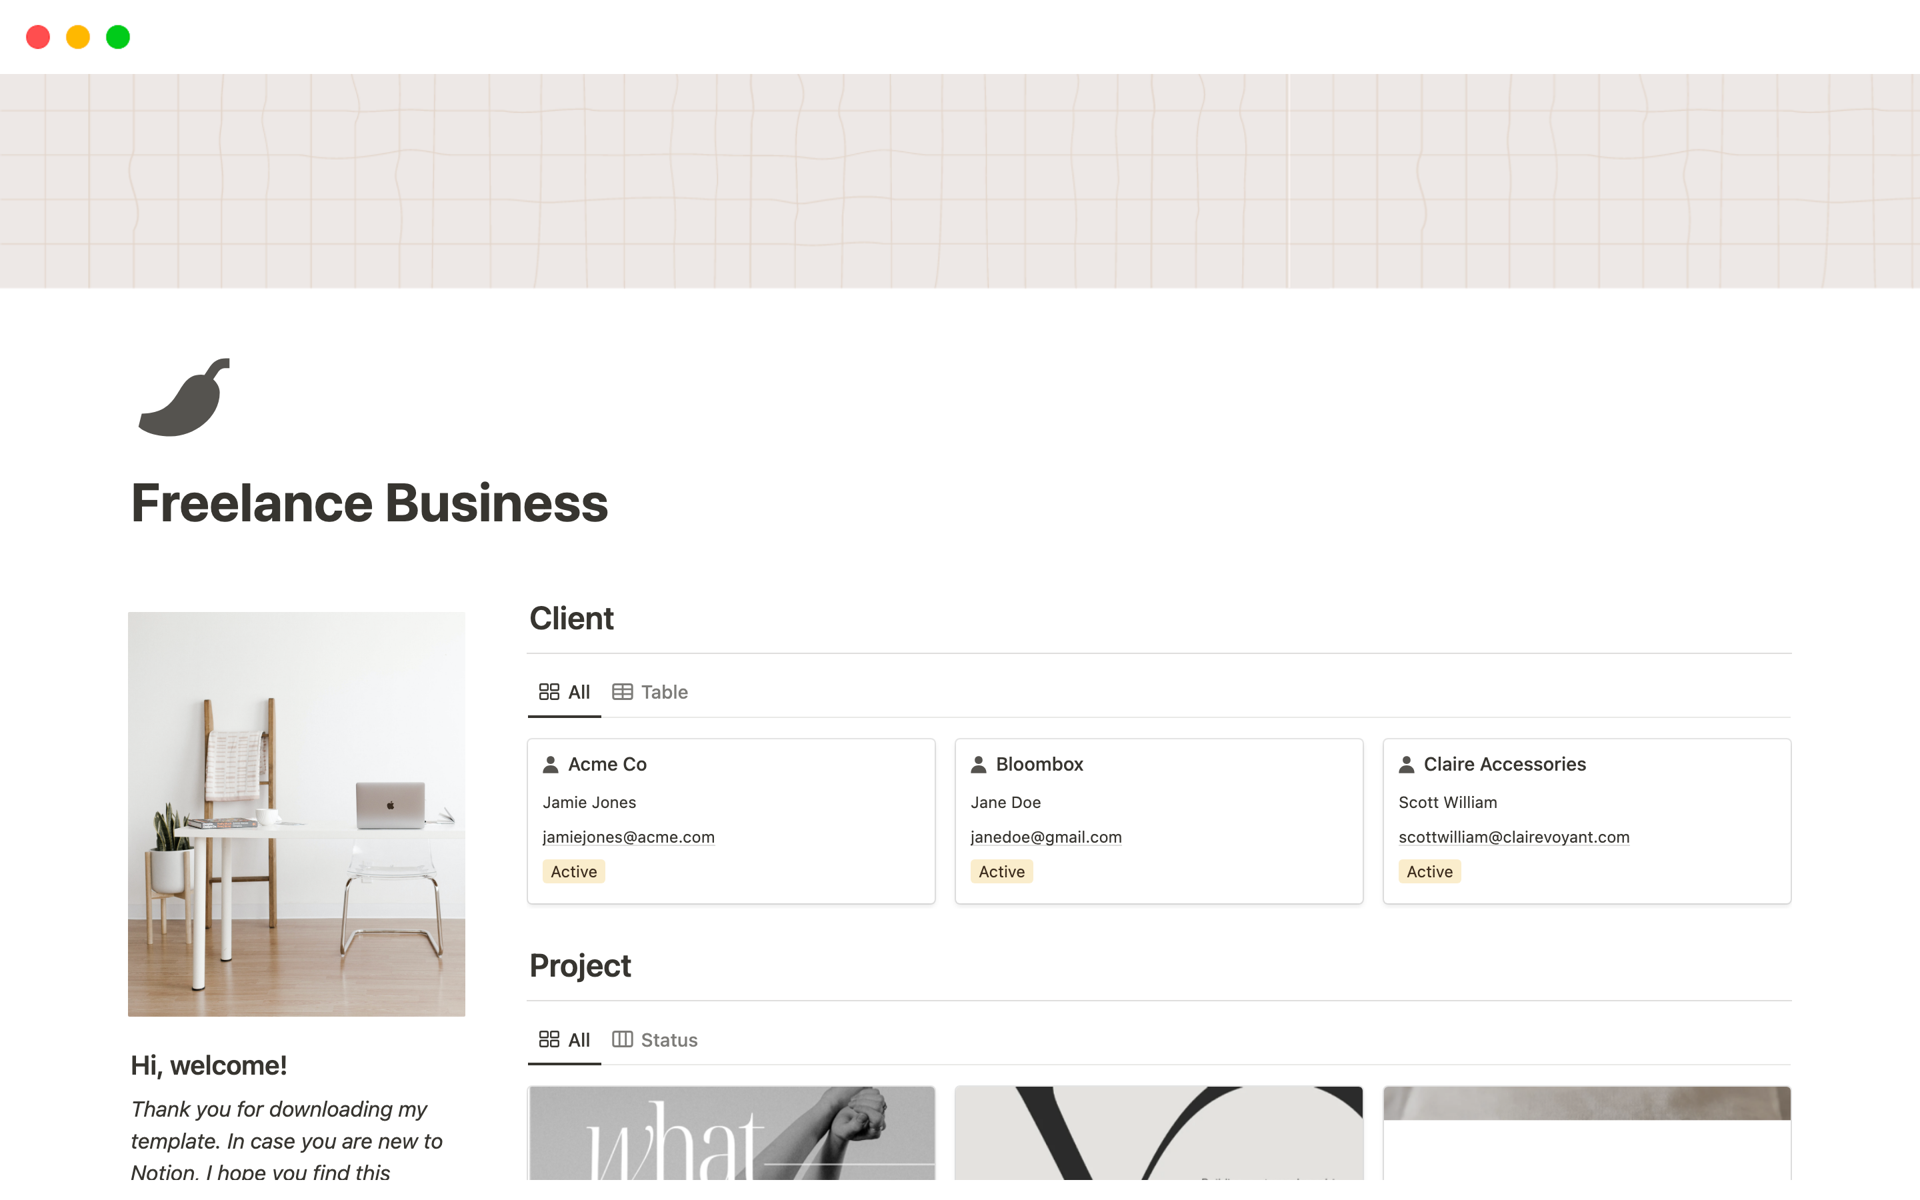 This Notion template helps freelancers manage their service based business.